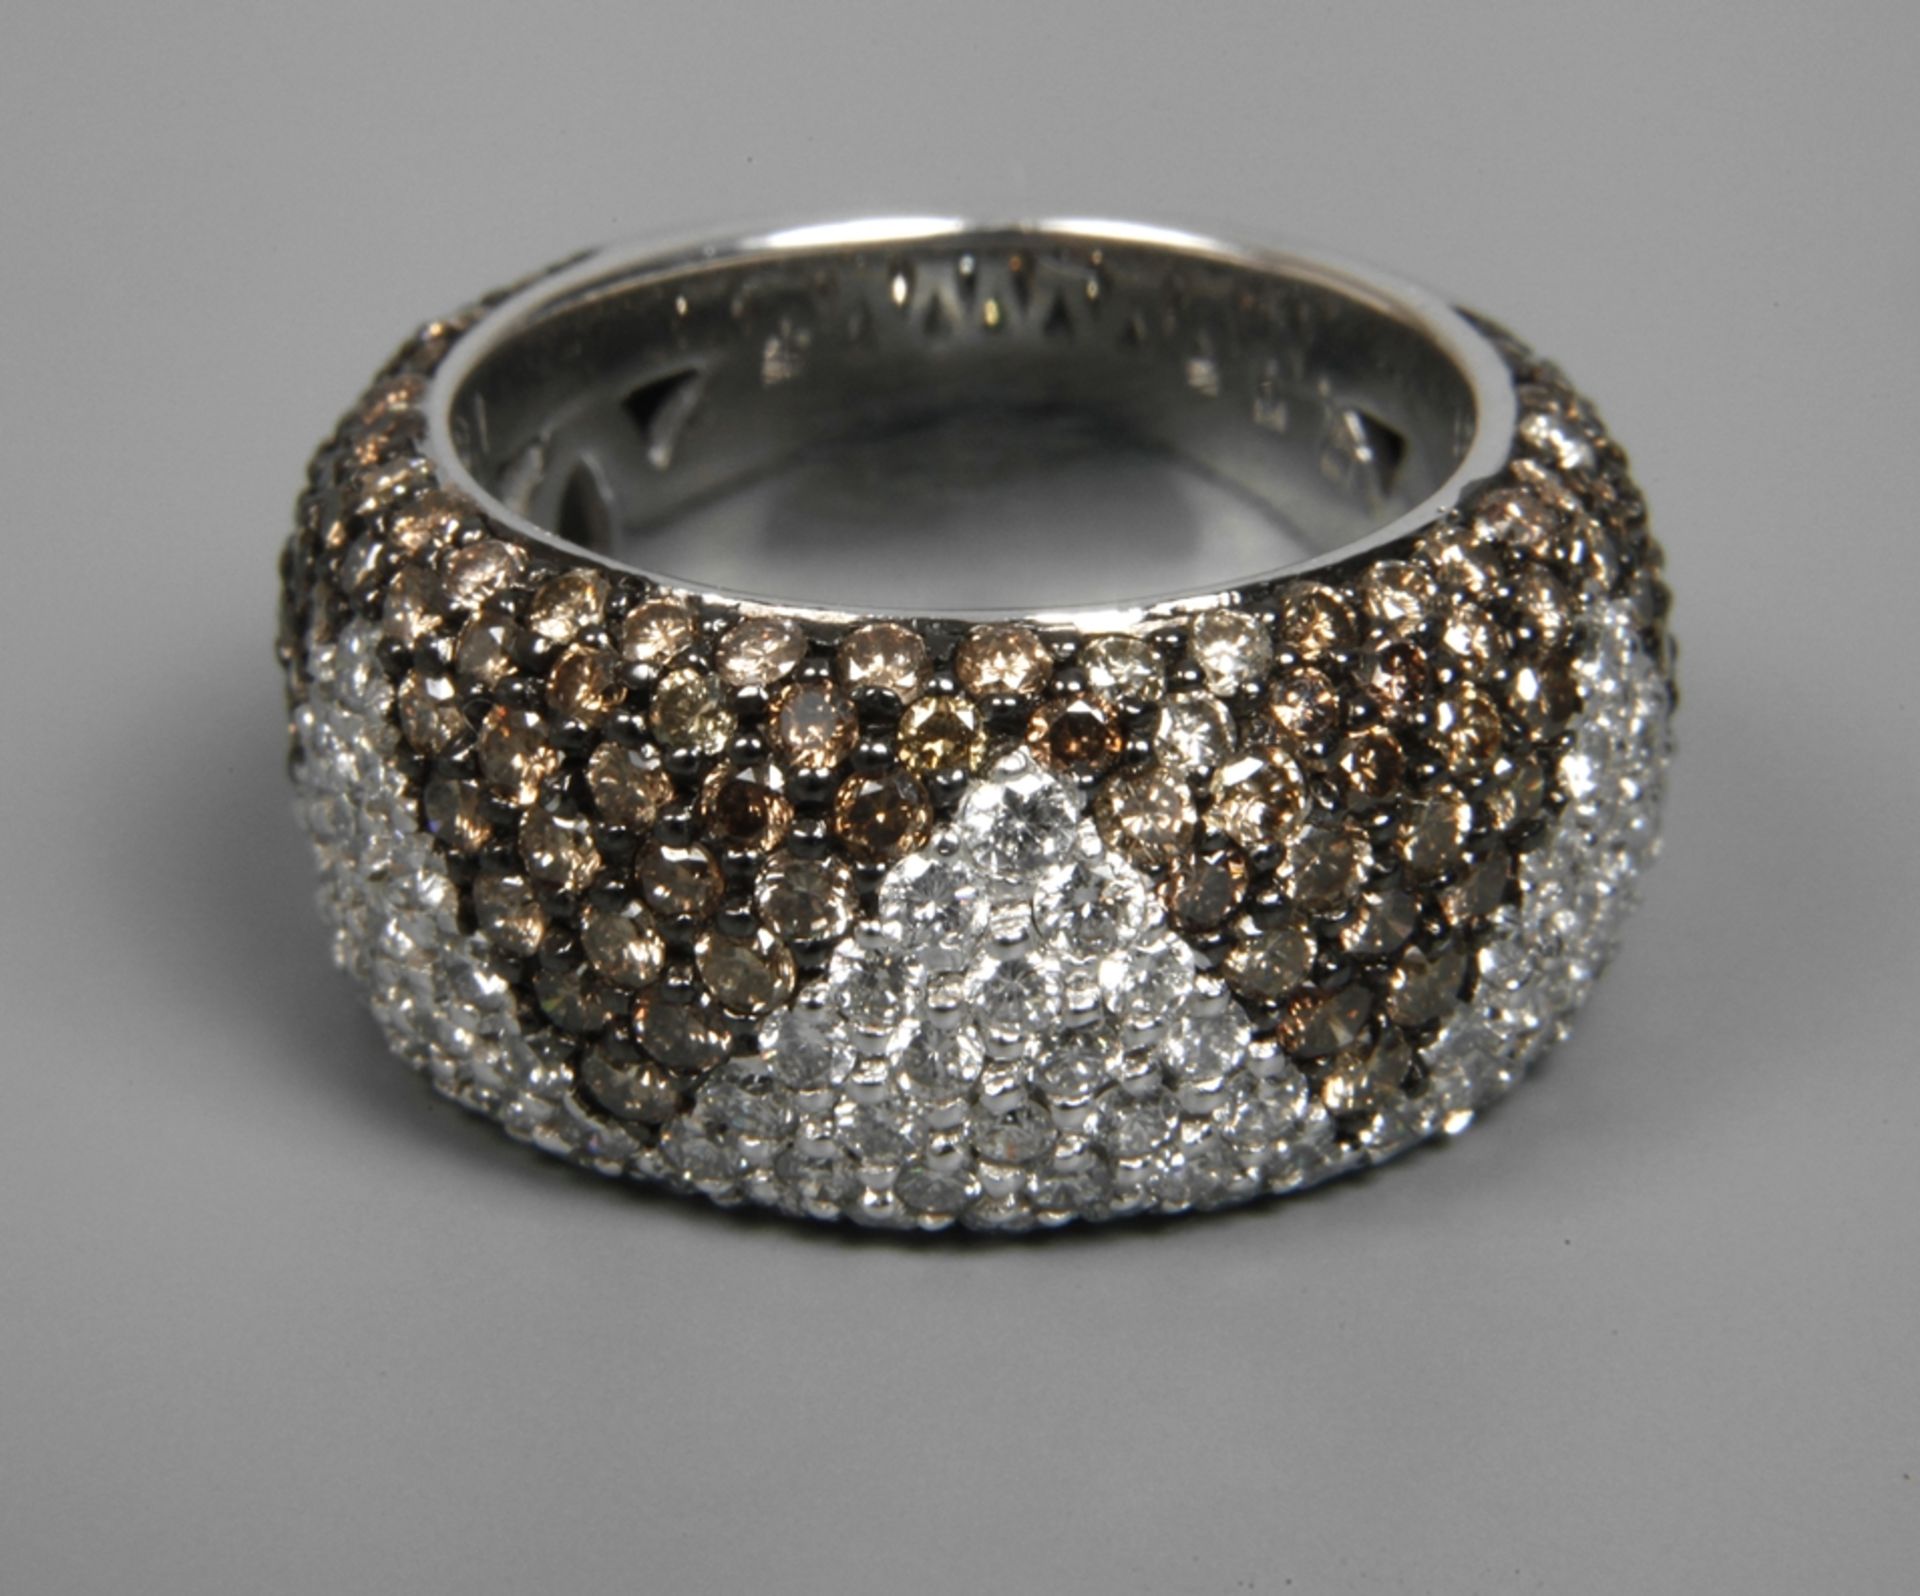 Lady's ring set with brilliant-cut diamonds